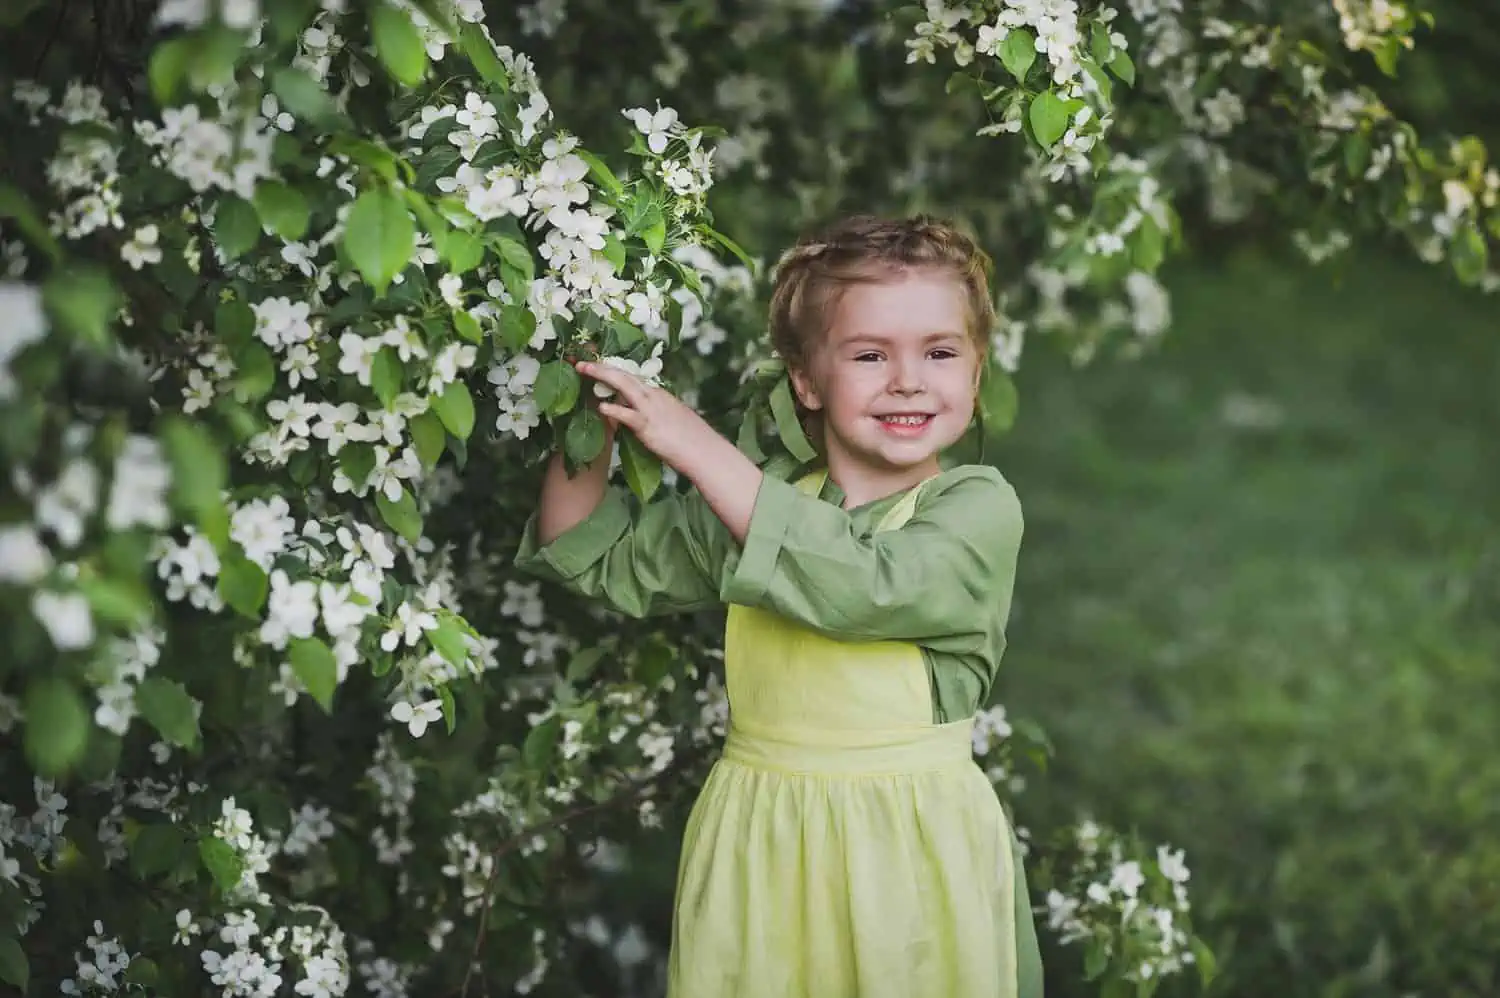 Adorable blonde girl picking flowers in the garden